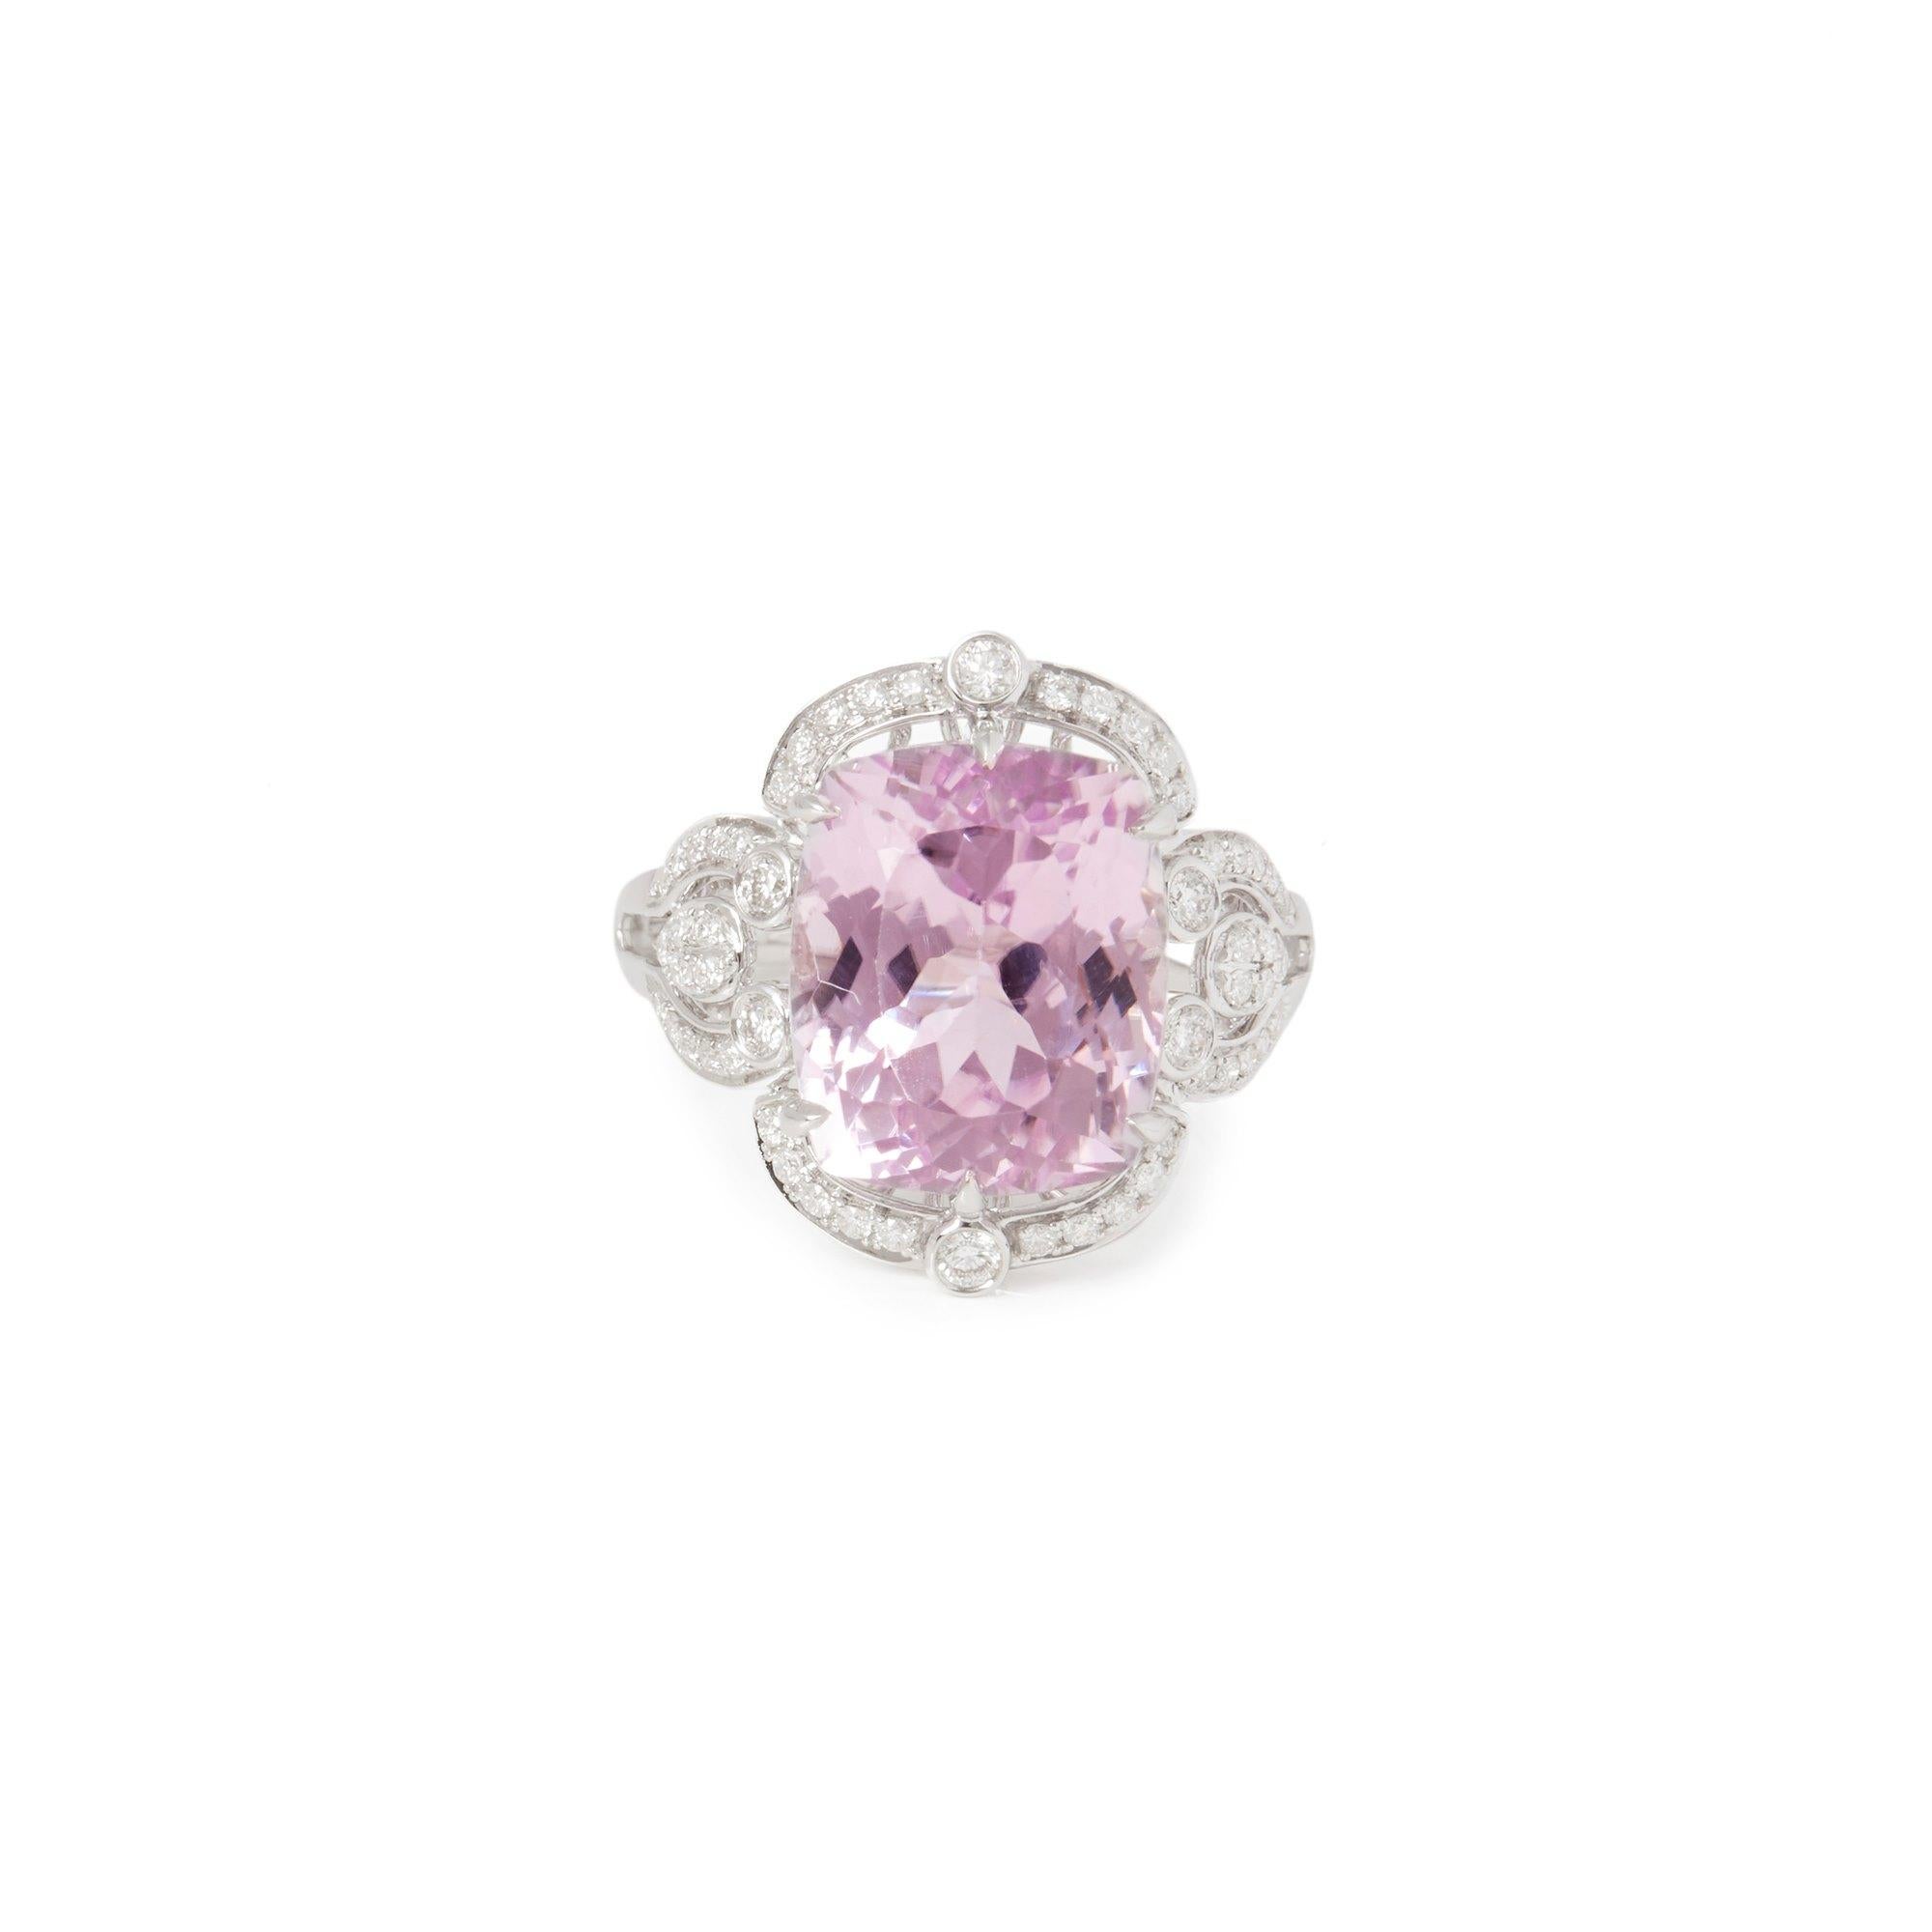 This ring designed by David Jerome is from his private collection and features one natural unheated cushion cut kunzite totalling 9.94cts sourced in Afghanistan. Set with round brilliant cut Diamonds totalling 0.42cts mounted in an 18k white gold